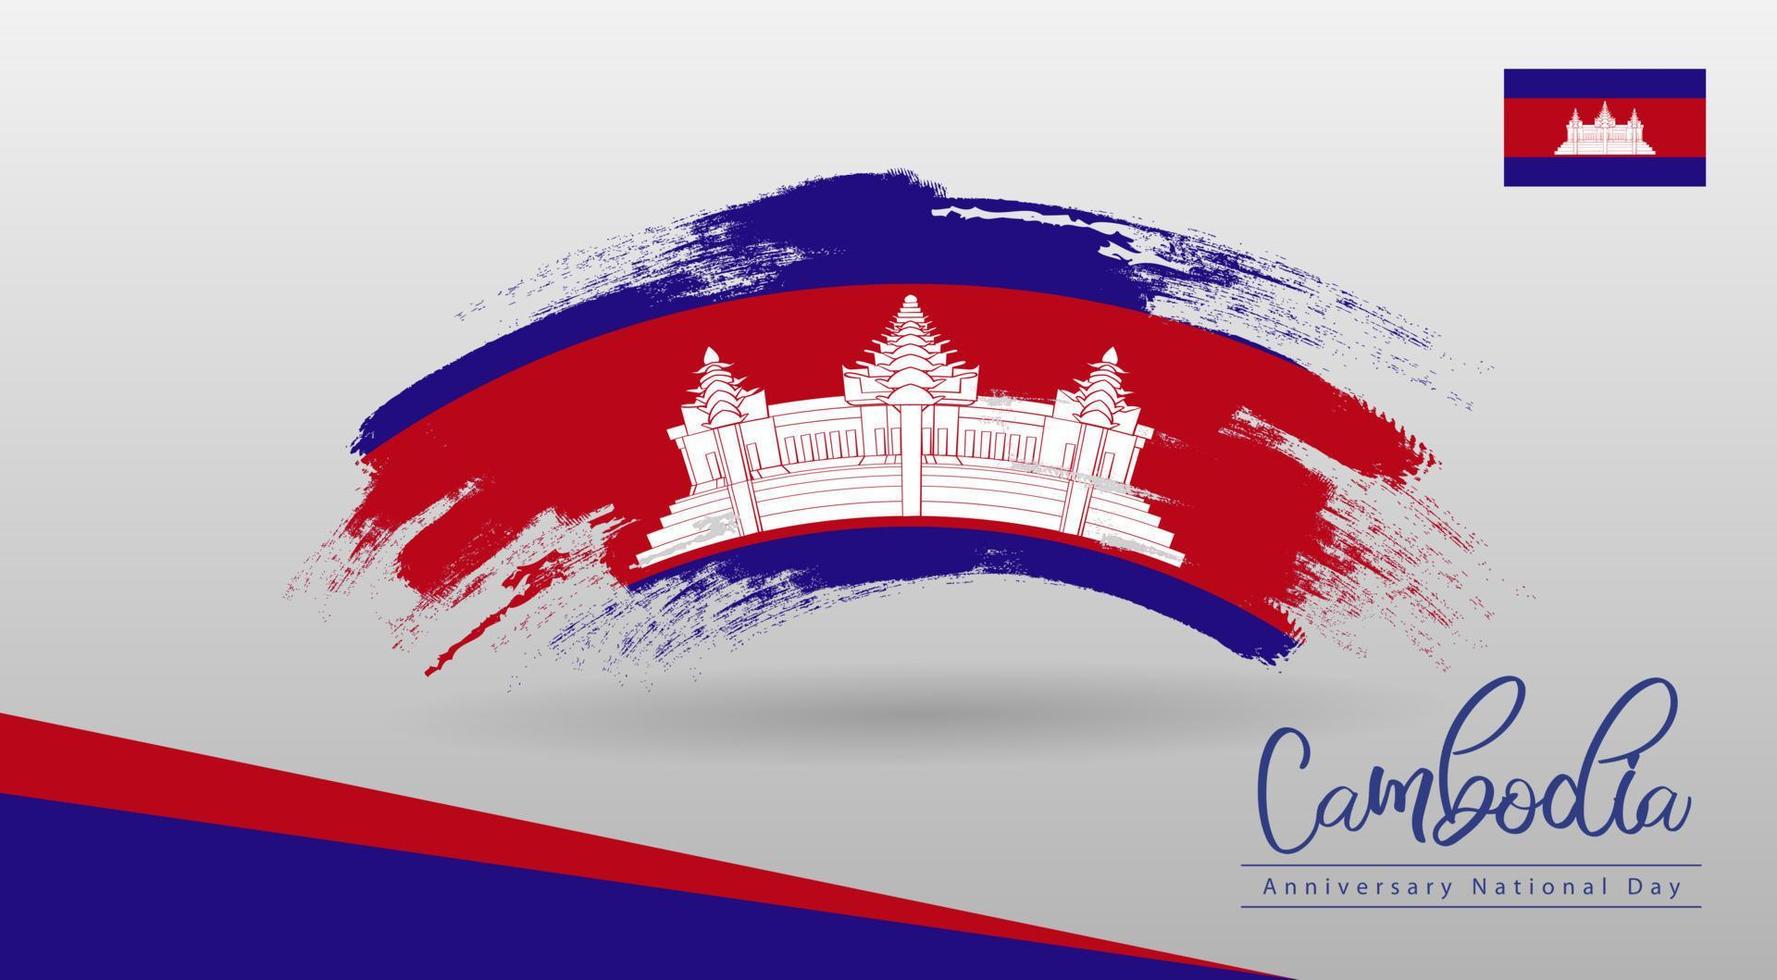 Happy National Day Cambodia. Banner, Greeting card, Flyer design. Poster Template Design vector